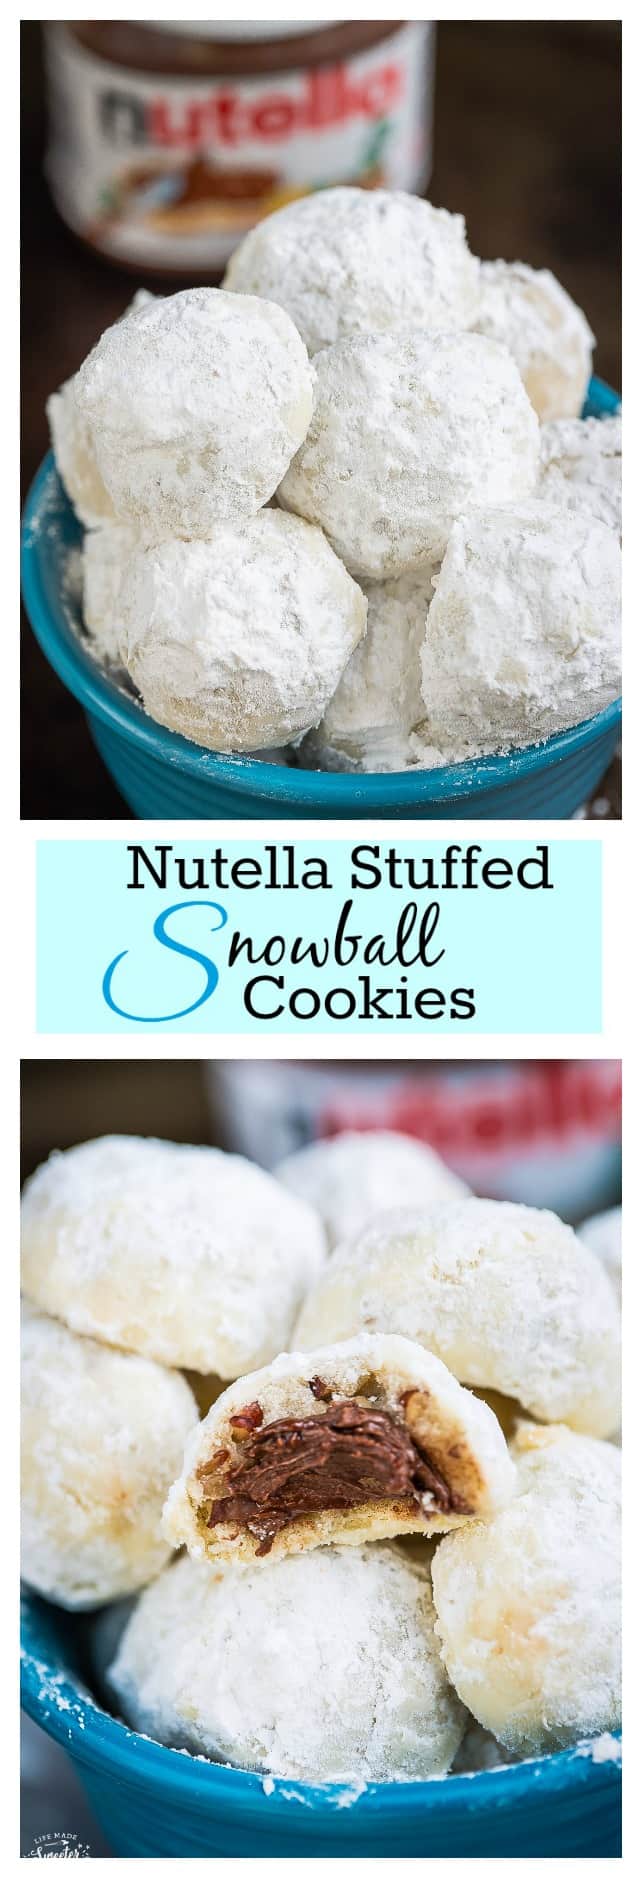 Nutella Stuffed Snowball Cookies are perfect for your Christmas cookie tray!!!!